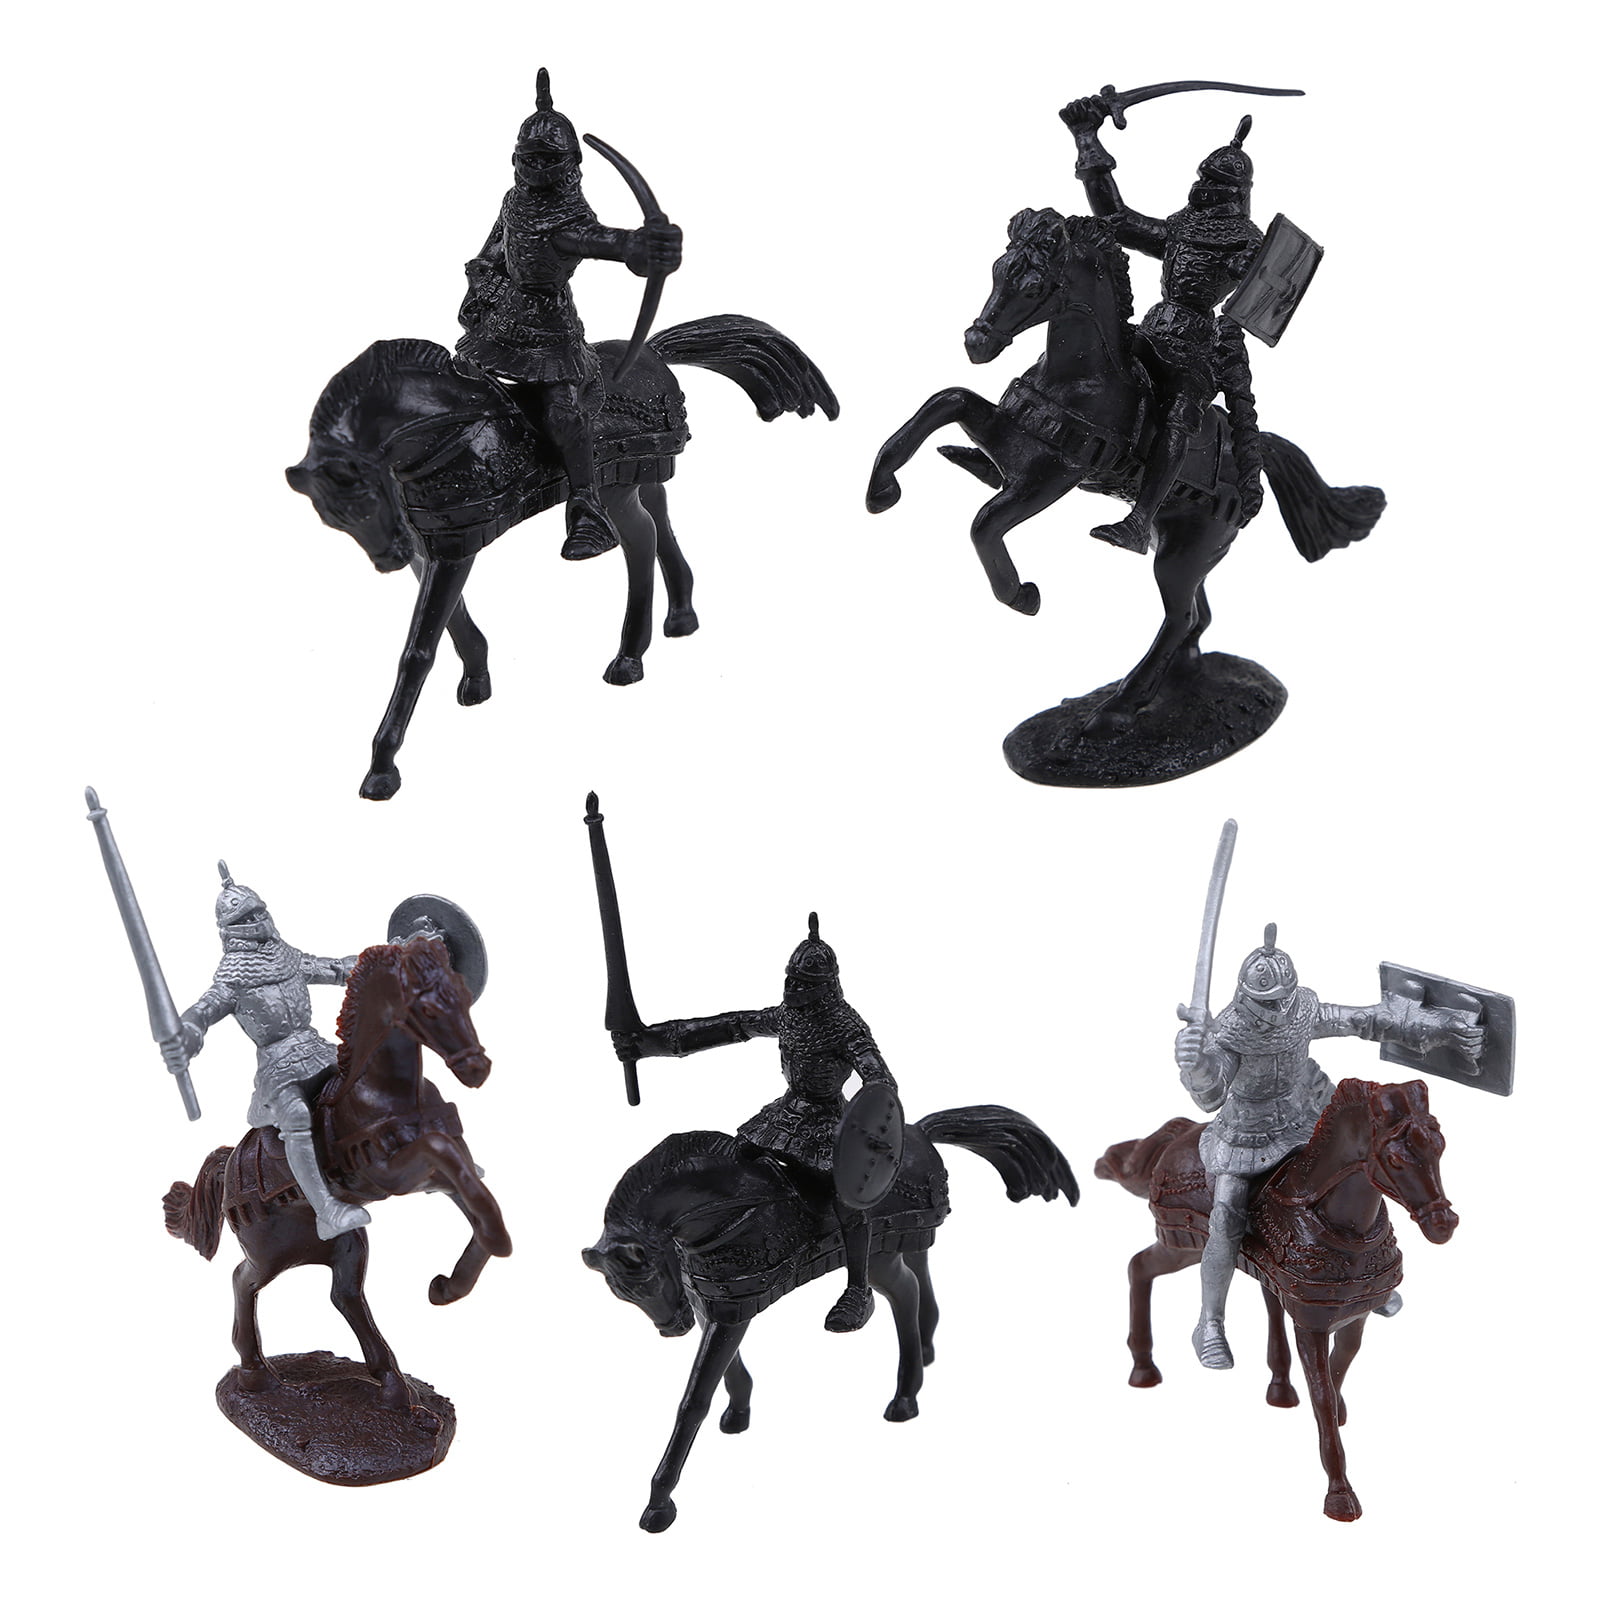 Medieval Knights Horses Castle Soldiers Figures Model Playset Kids Toy 